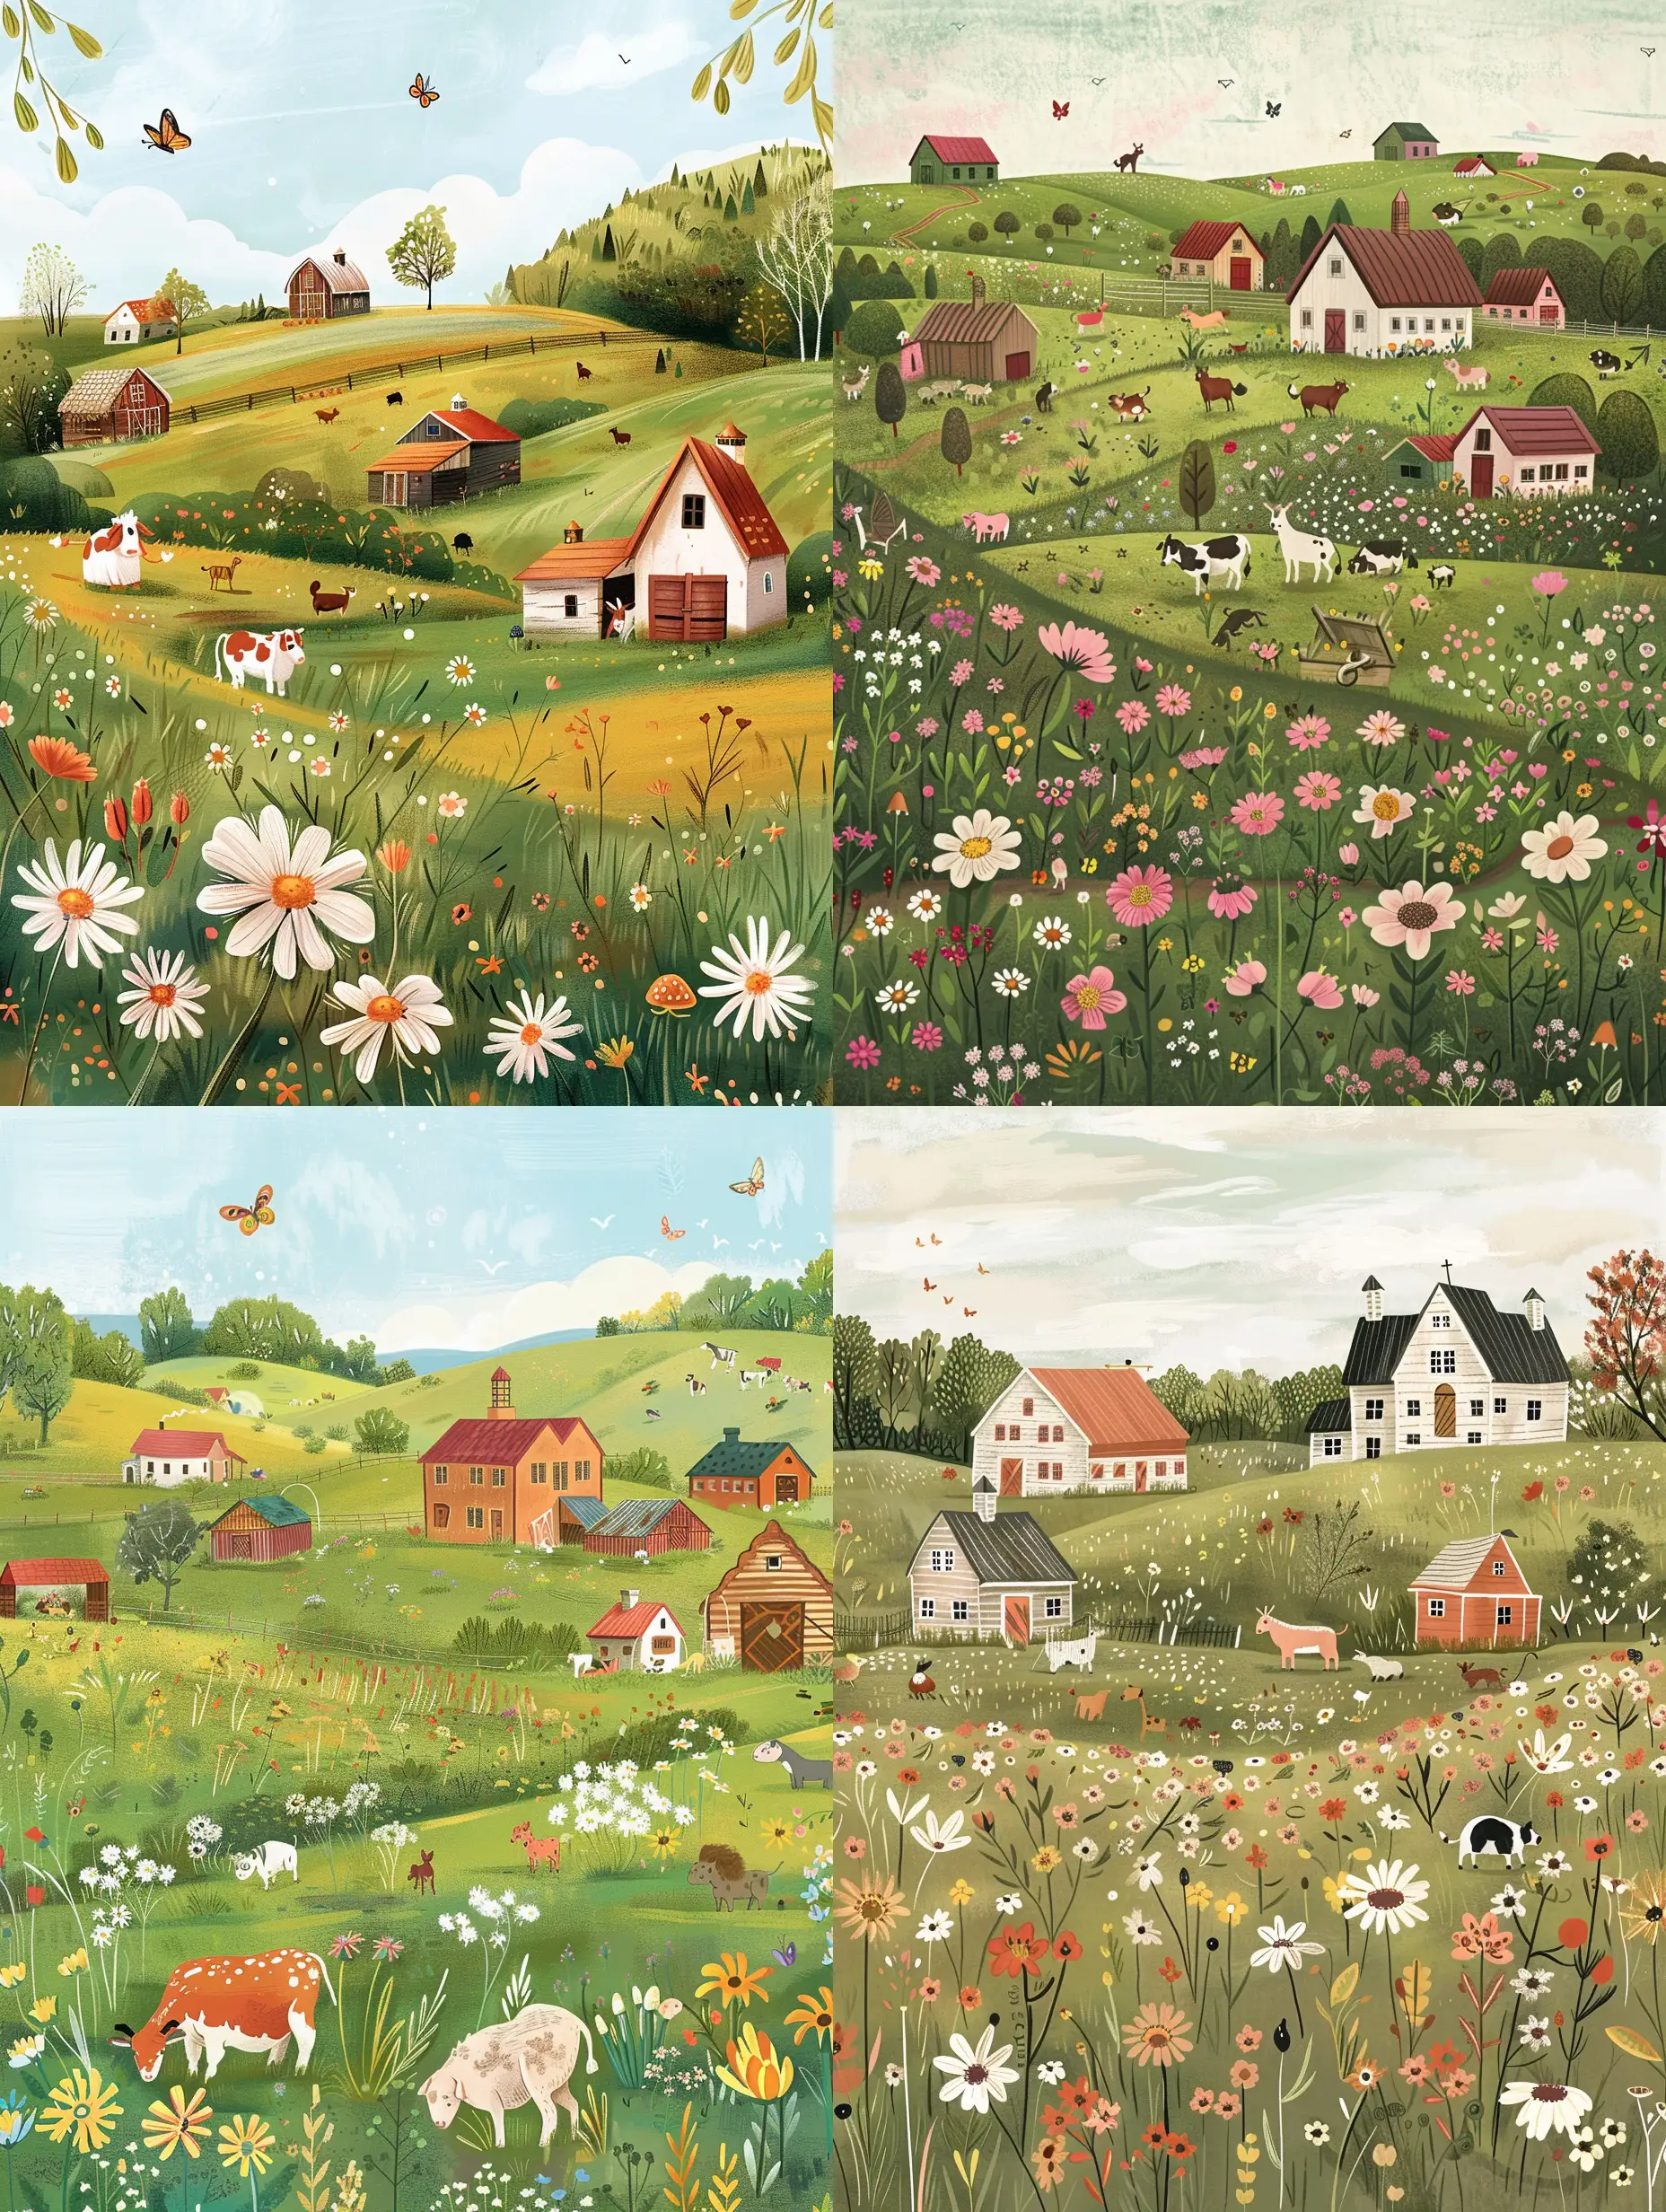 Subject: The main subject of the image is a farm located in a meadow for a children's book
Setting: The background depicts a serene countryside, evoking a sense of tranquility and natural beauty. The contrast between the farm buildings and the calming tones of the flowering field creates visual interest and depth.
Style/Coloration: The style of the image characterized by clean lines, and vivid colors. The use of rich colors enhances the overall warmth and vibrancy of the scene.
Action or elements: On the farm you can see well-defined animals. There may be additional elements in the scene, such as fluttering butterflies or a gentle breeze rustling the flowers, contributing to the overall feeling of tranquility.